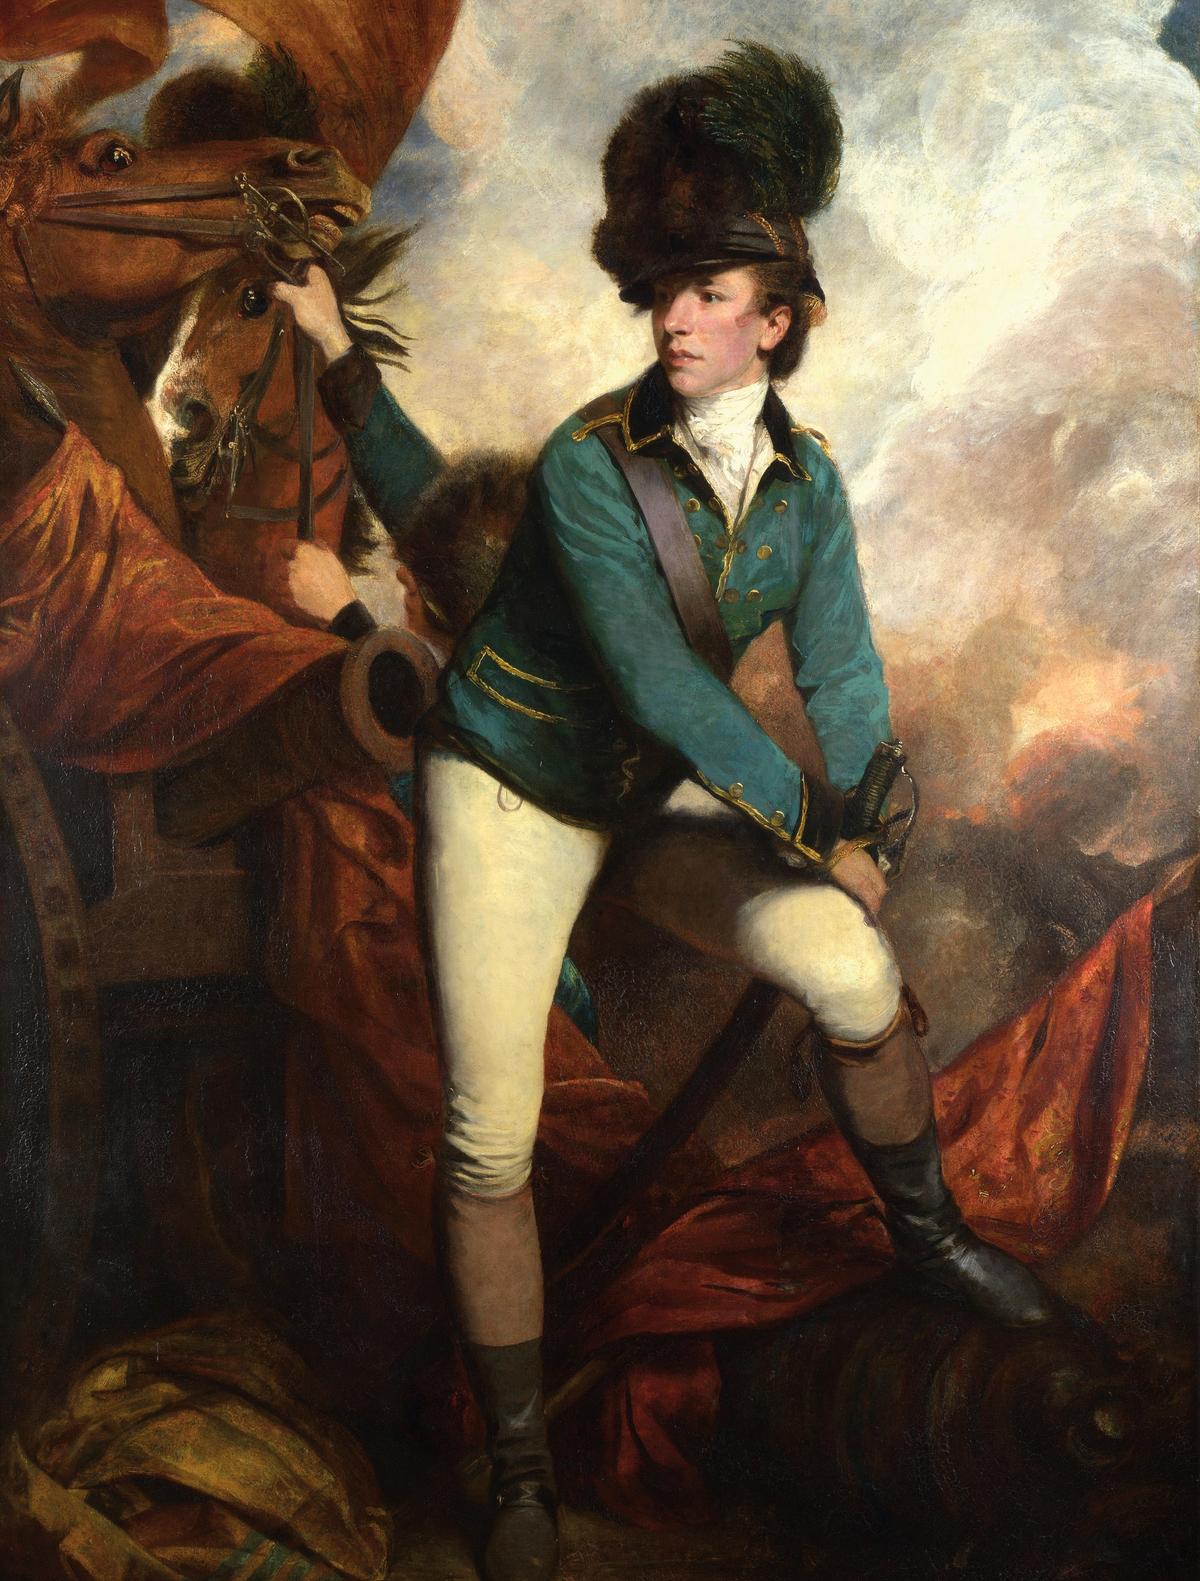 Lt. Col. Tarleton was determined to capture colonial lawmakers. “Portrait of Sir Banastre Tarleton” by Joshua Reynolds, 1782. National Gallery, London. (Public domain)